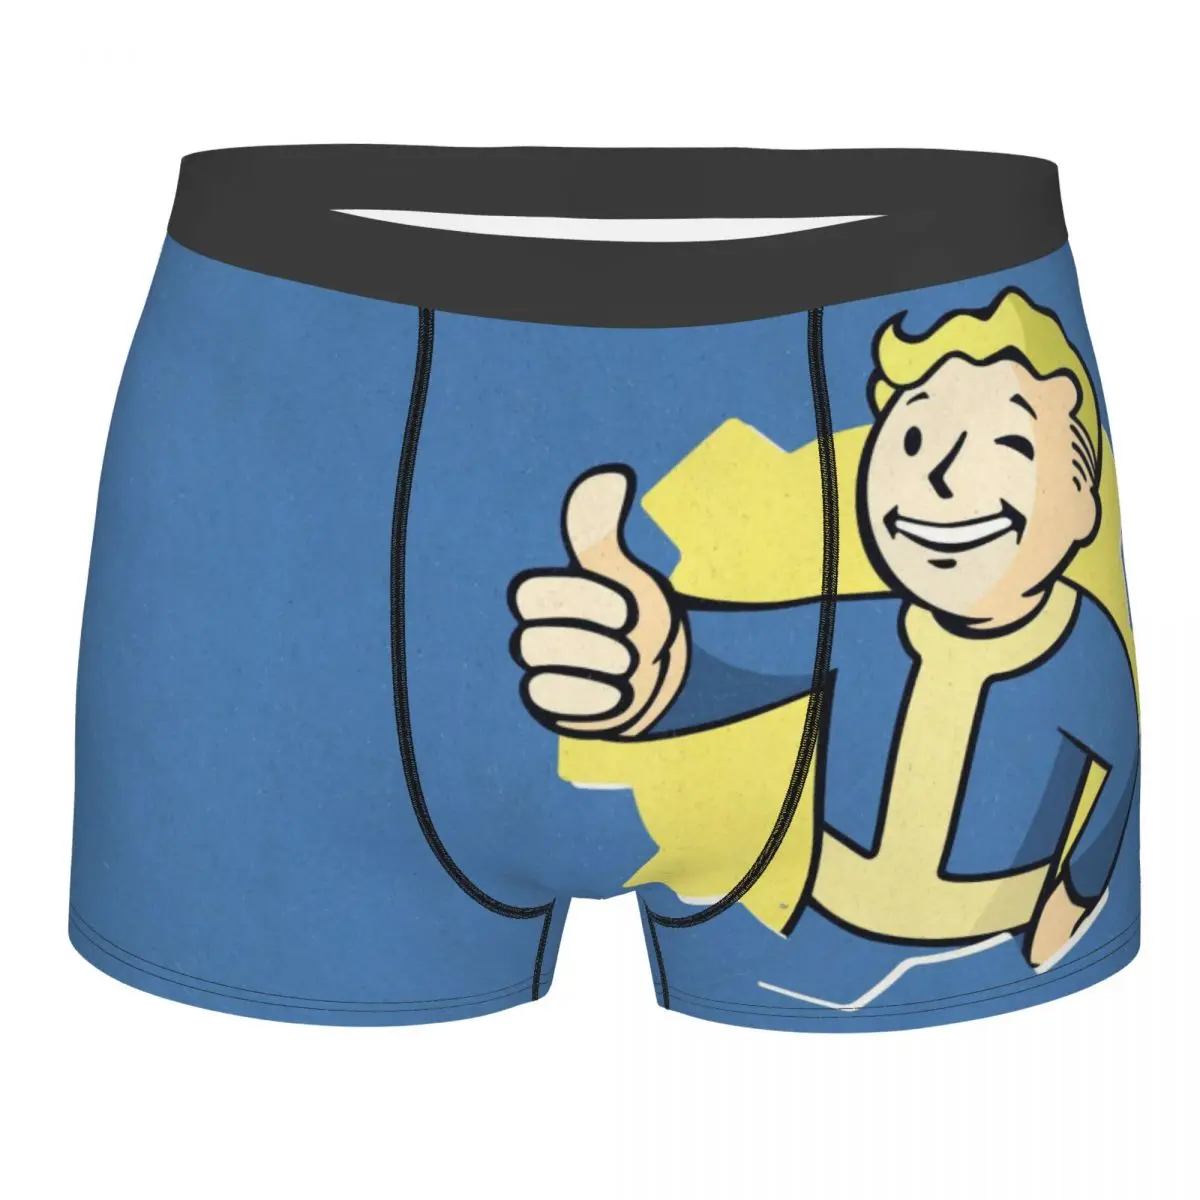 

Vault Boy Fallout 4 Kate Role Playing Game Underpants Homme Panties Male Underwear Comfortable Shorts Boxer Briefs